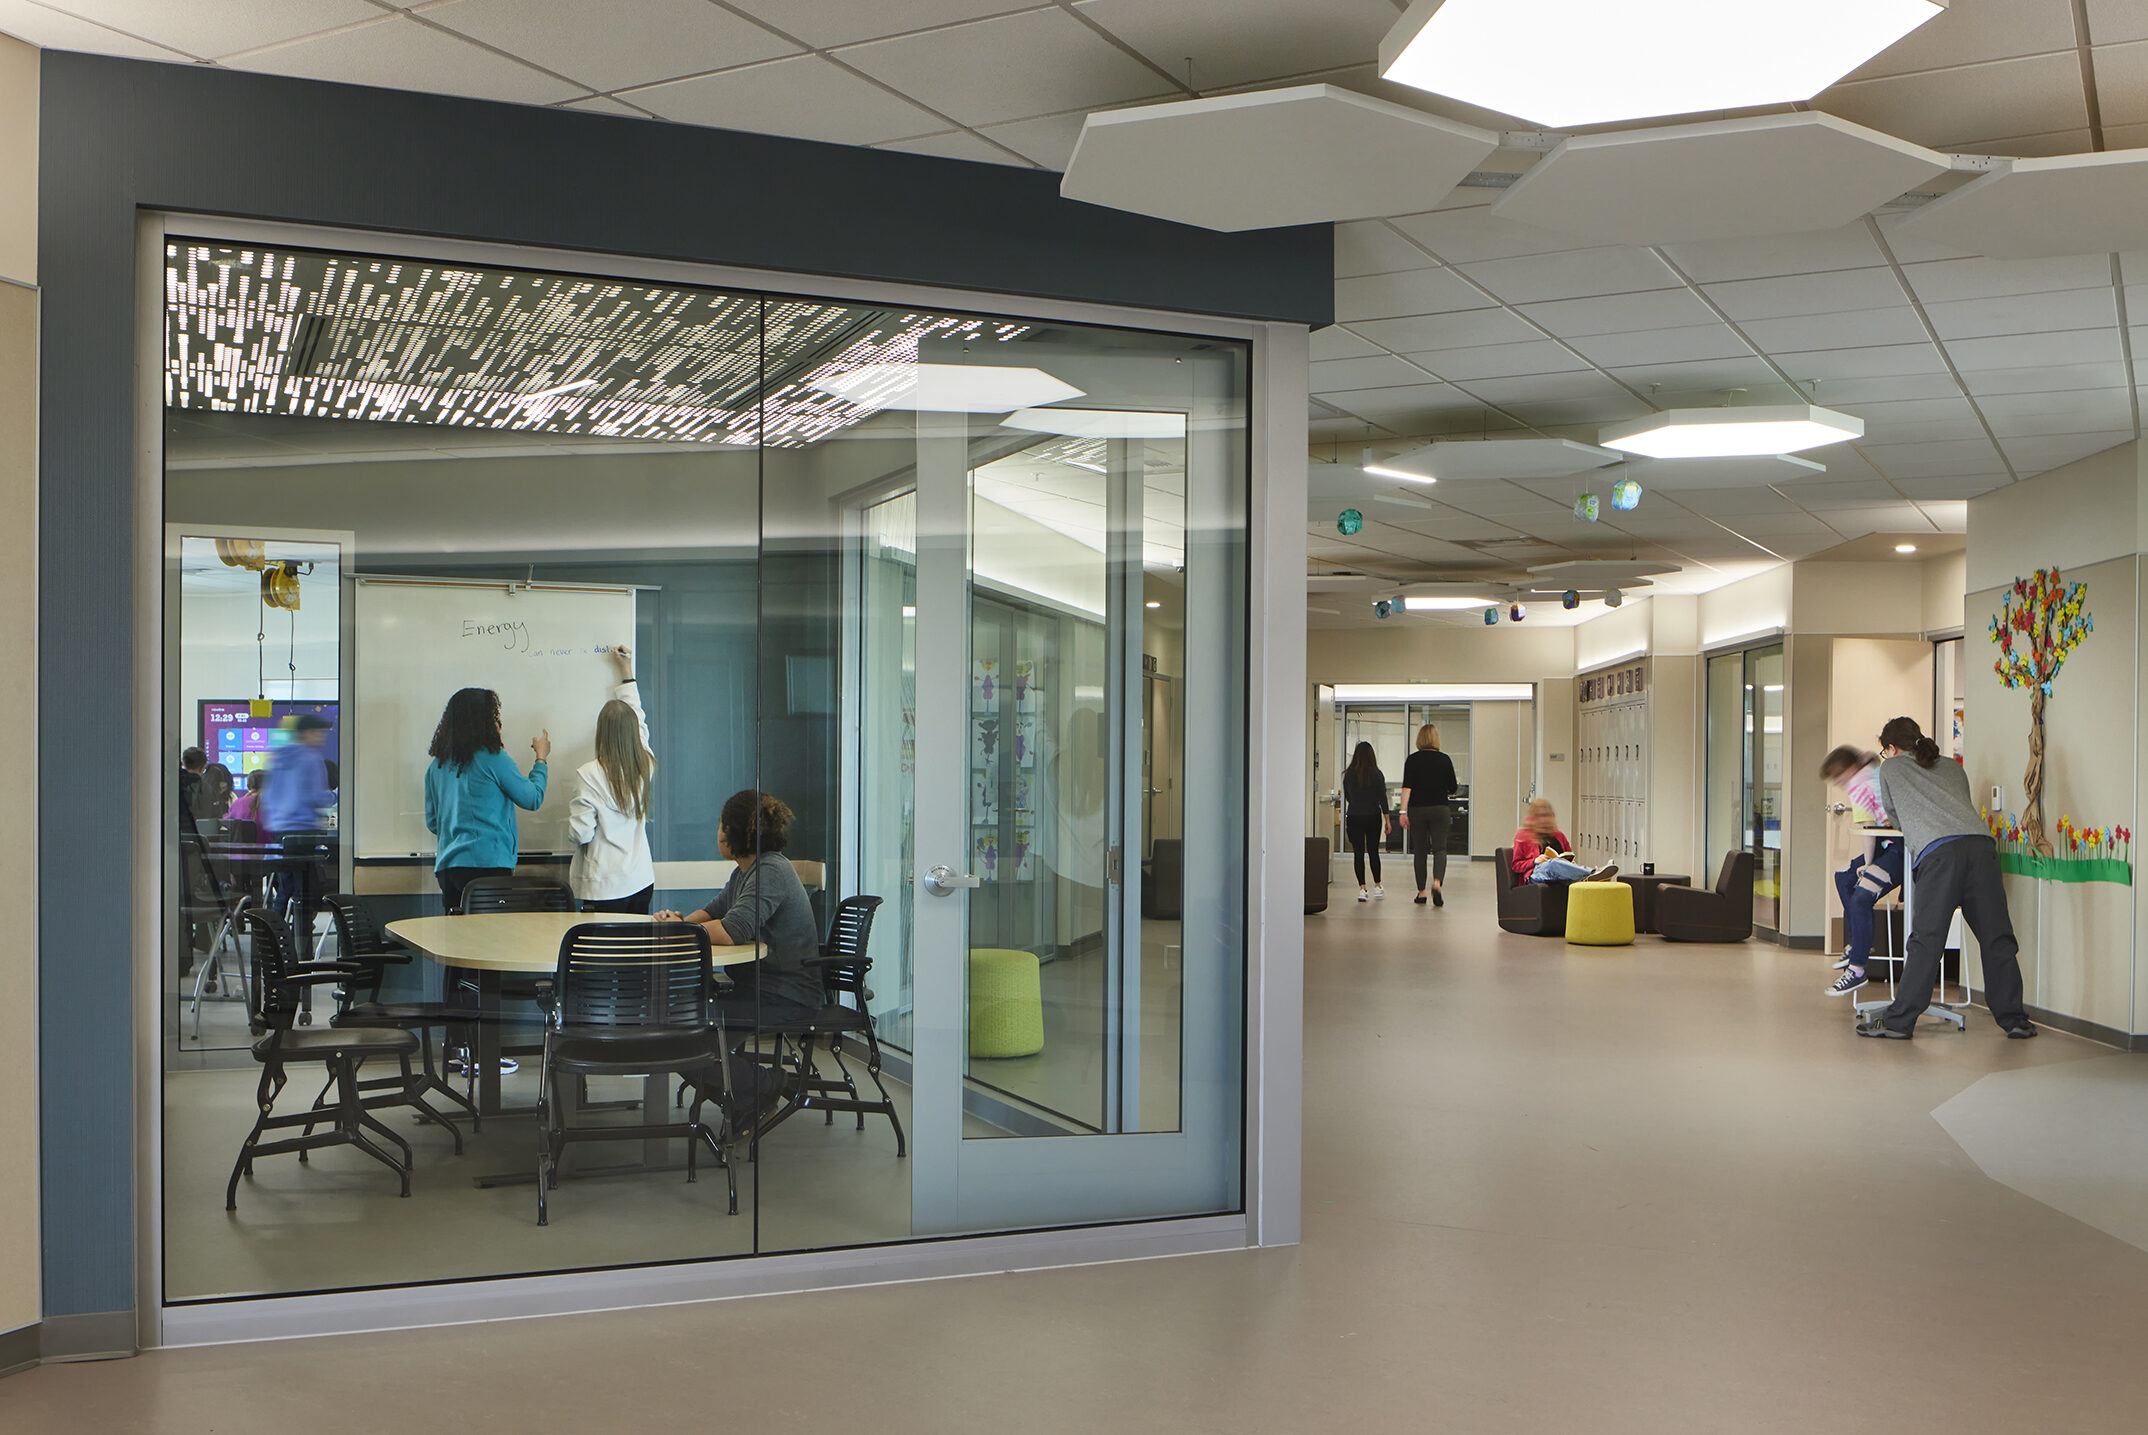 Huddle rooms within the learning neighborhoods provide visible but acoustically secure spaces for student groups, intervention meetings, or instructor and student one-on-one meetings.